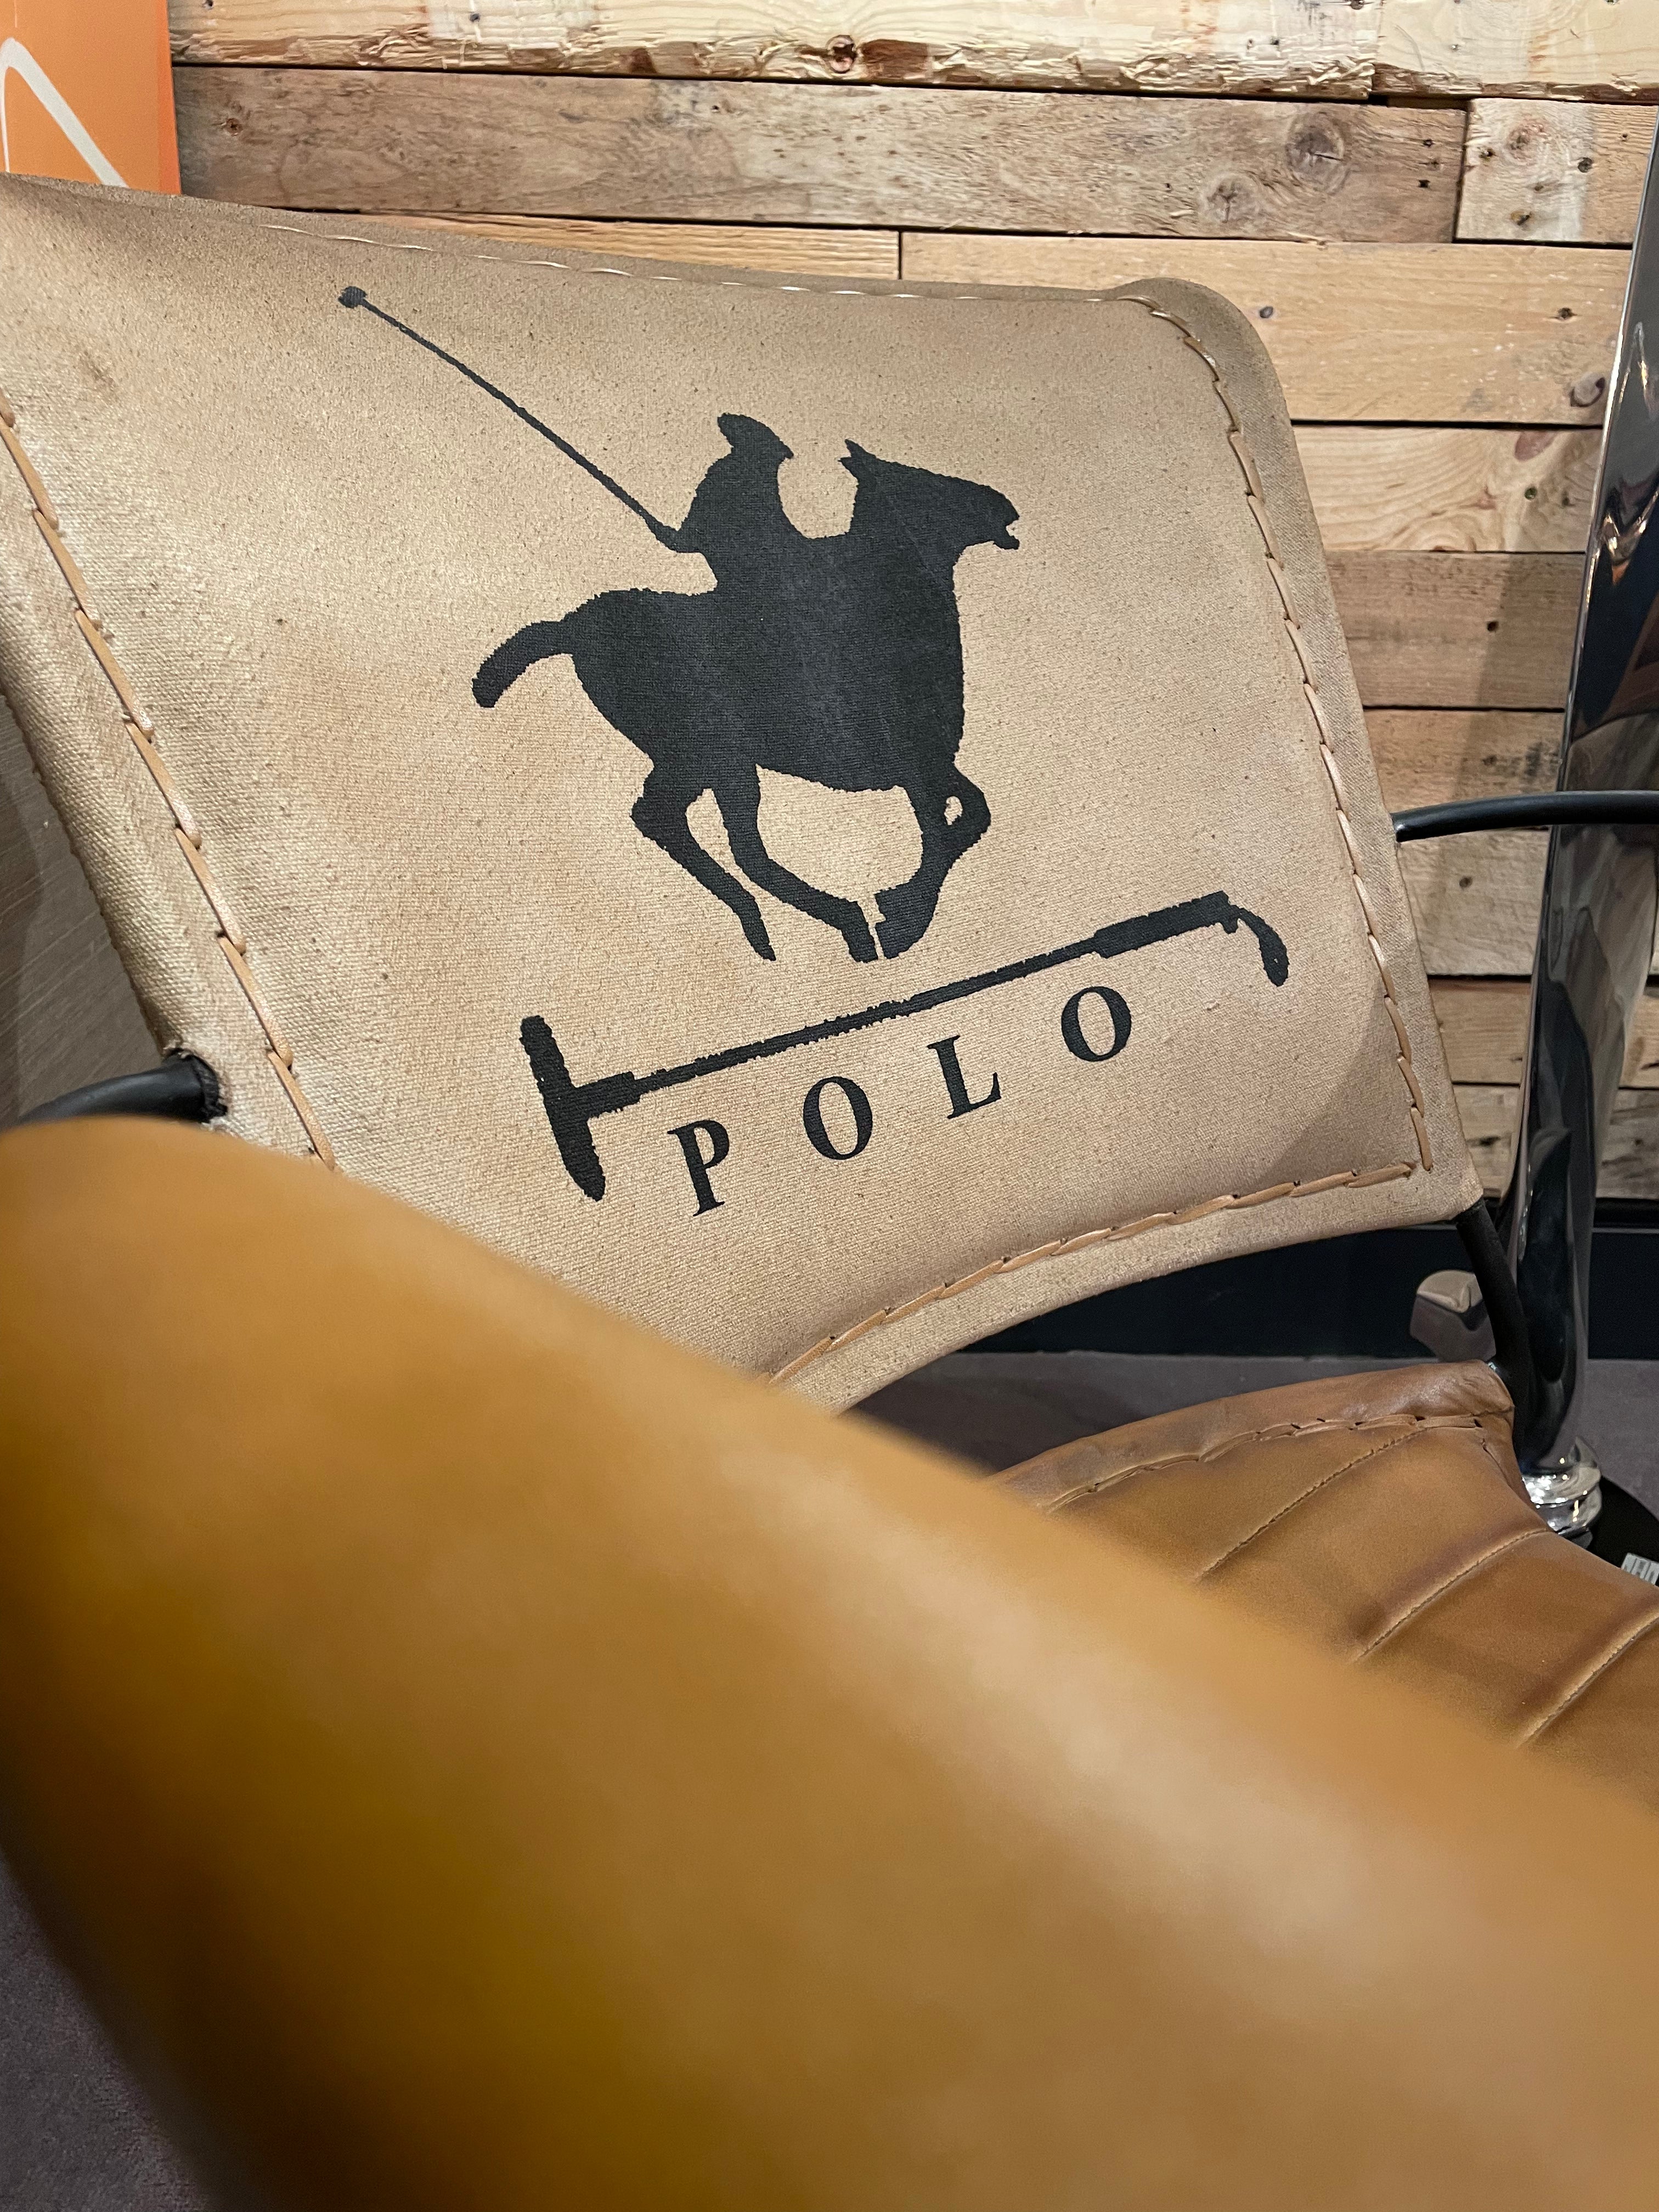 Canvas & Leather POLO Chair